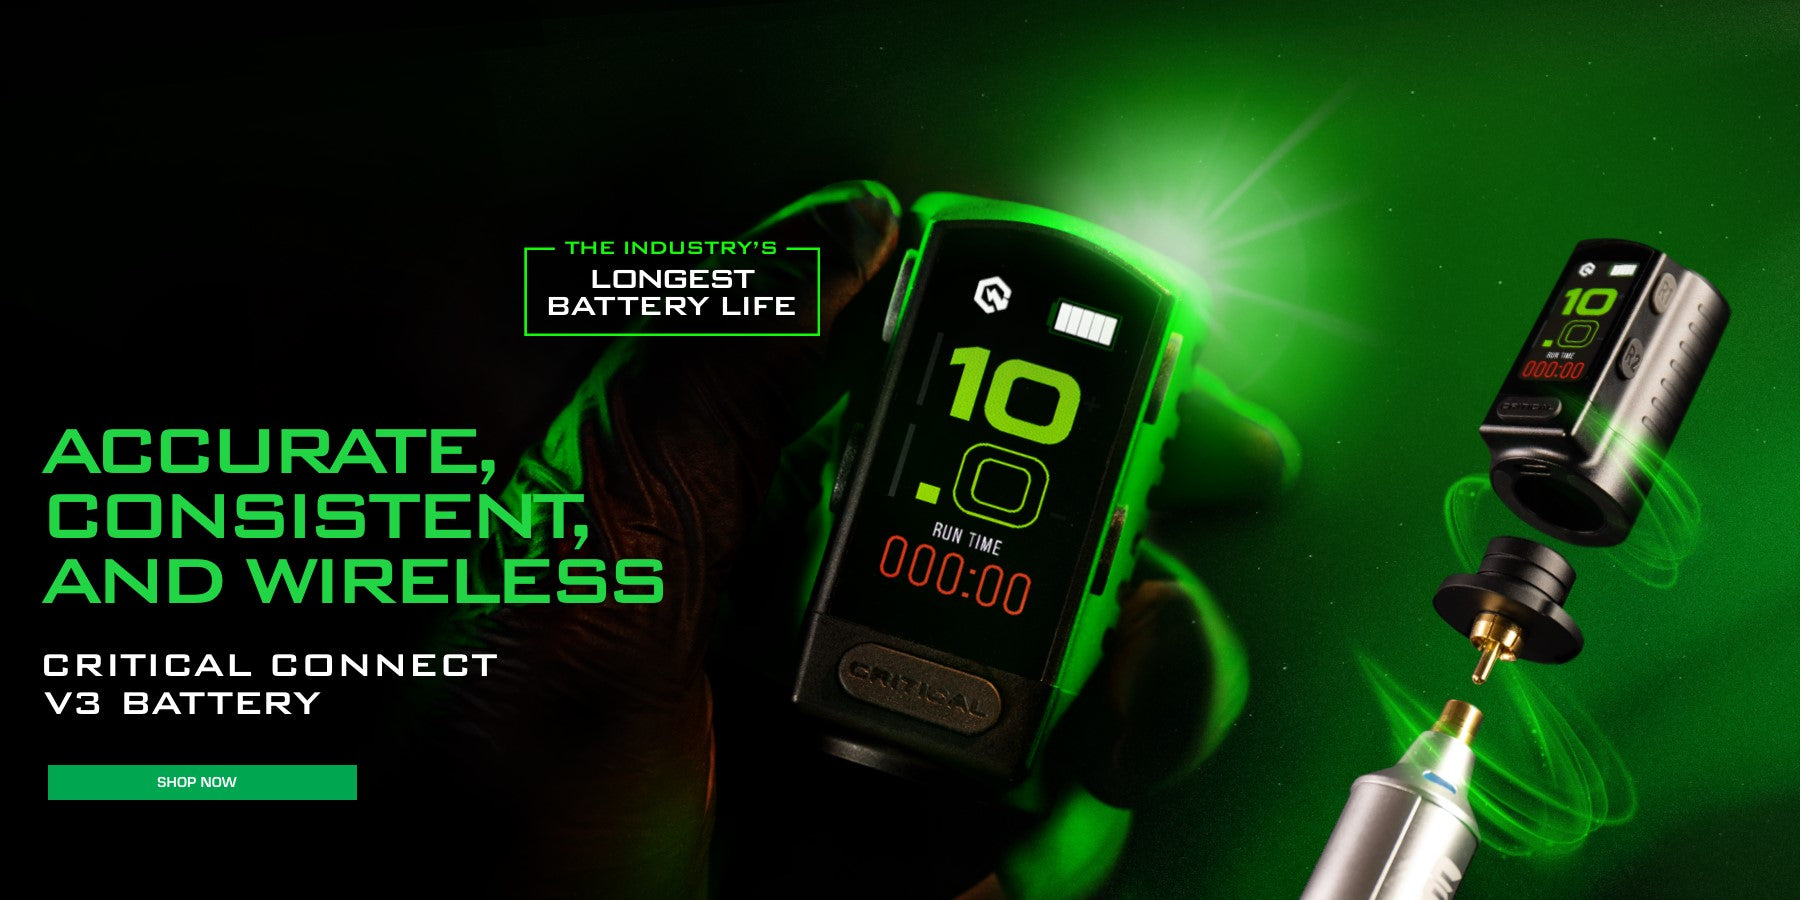 Critical Connect V3 Battery Now Available!